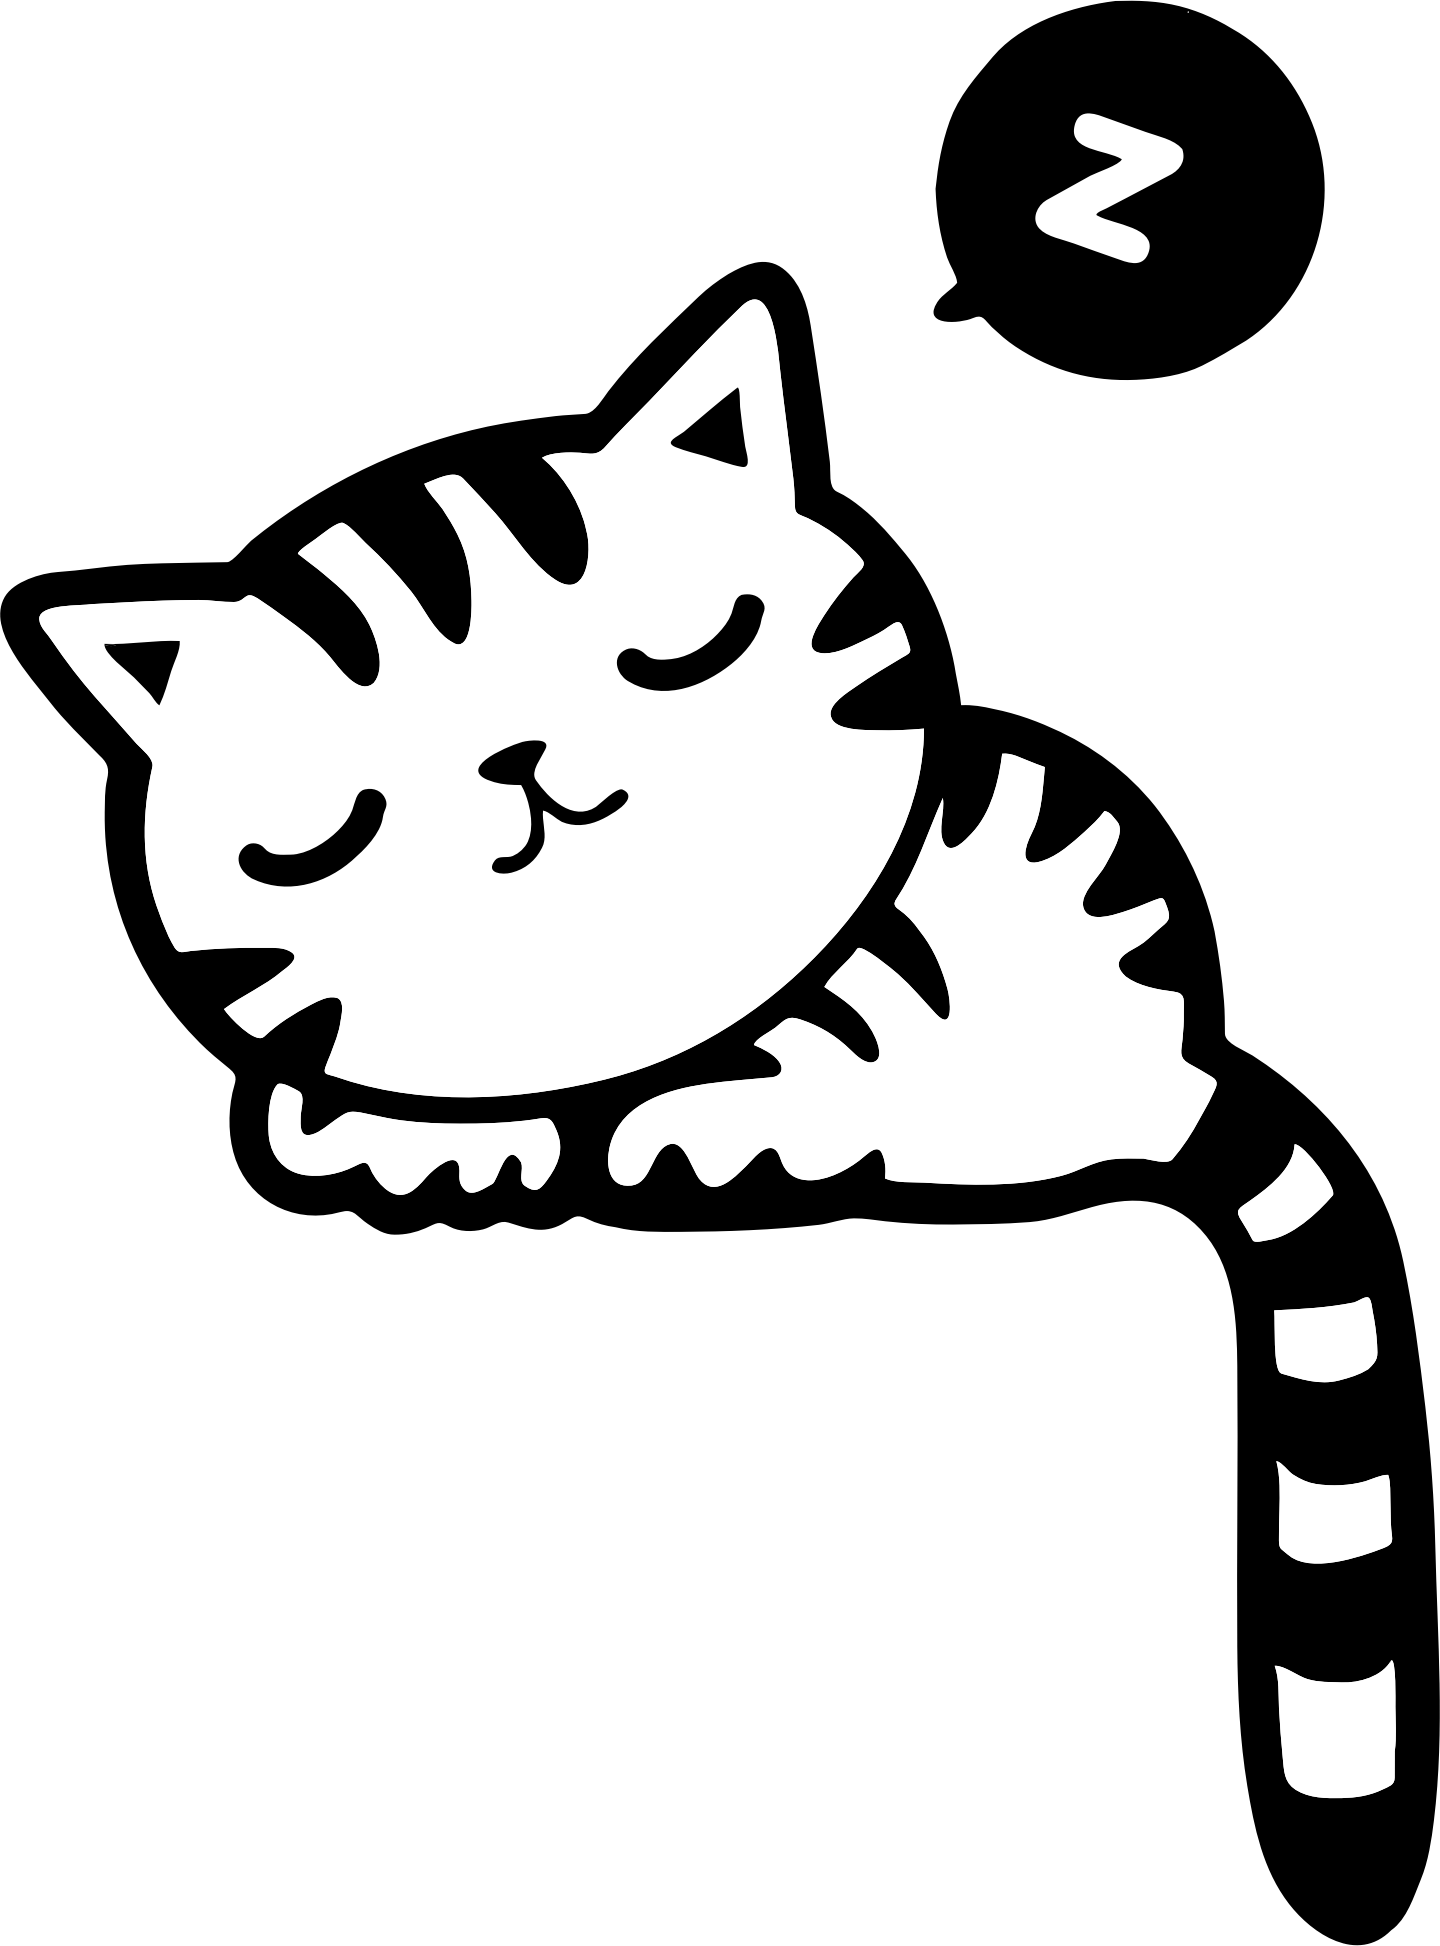 cat icons 4 - Openclipart